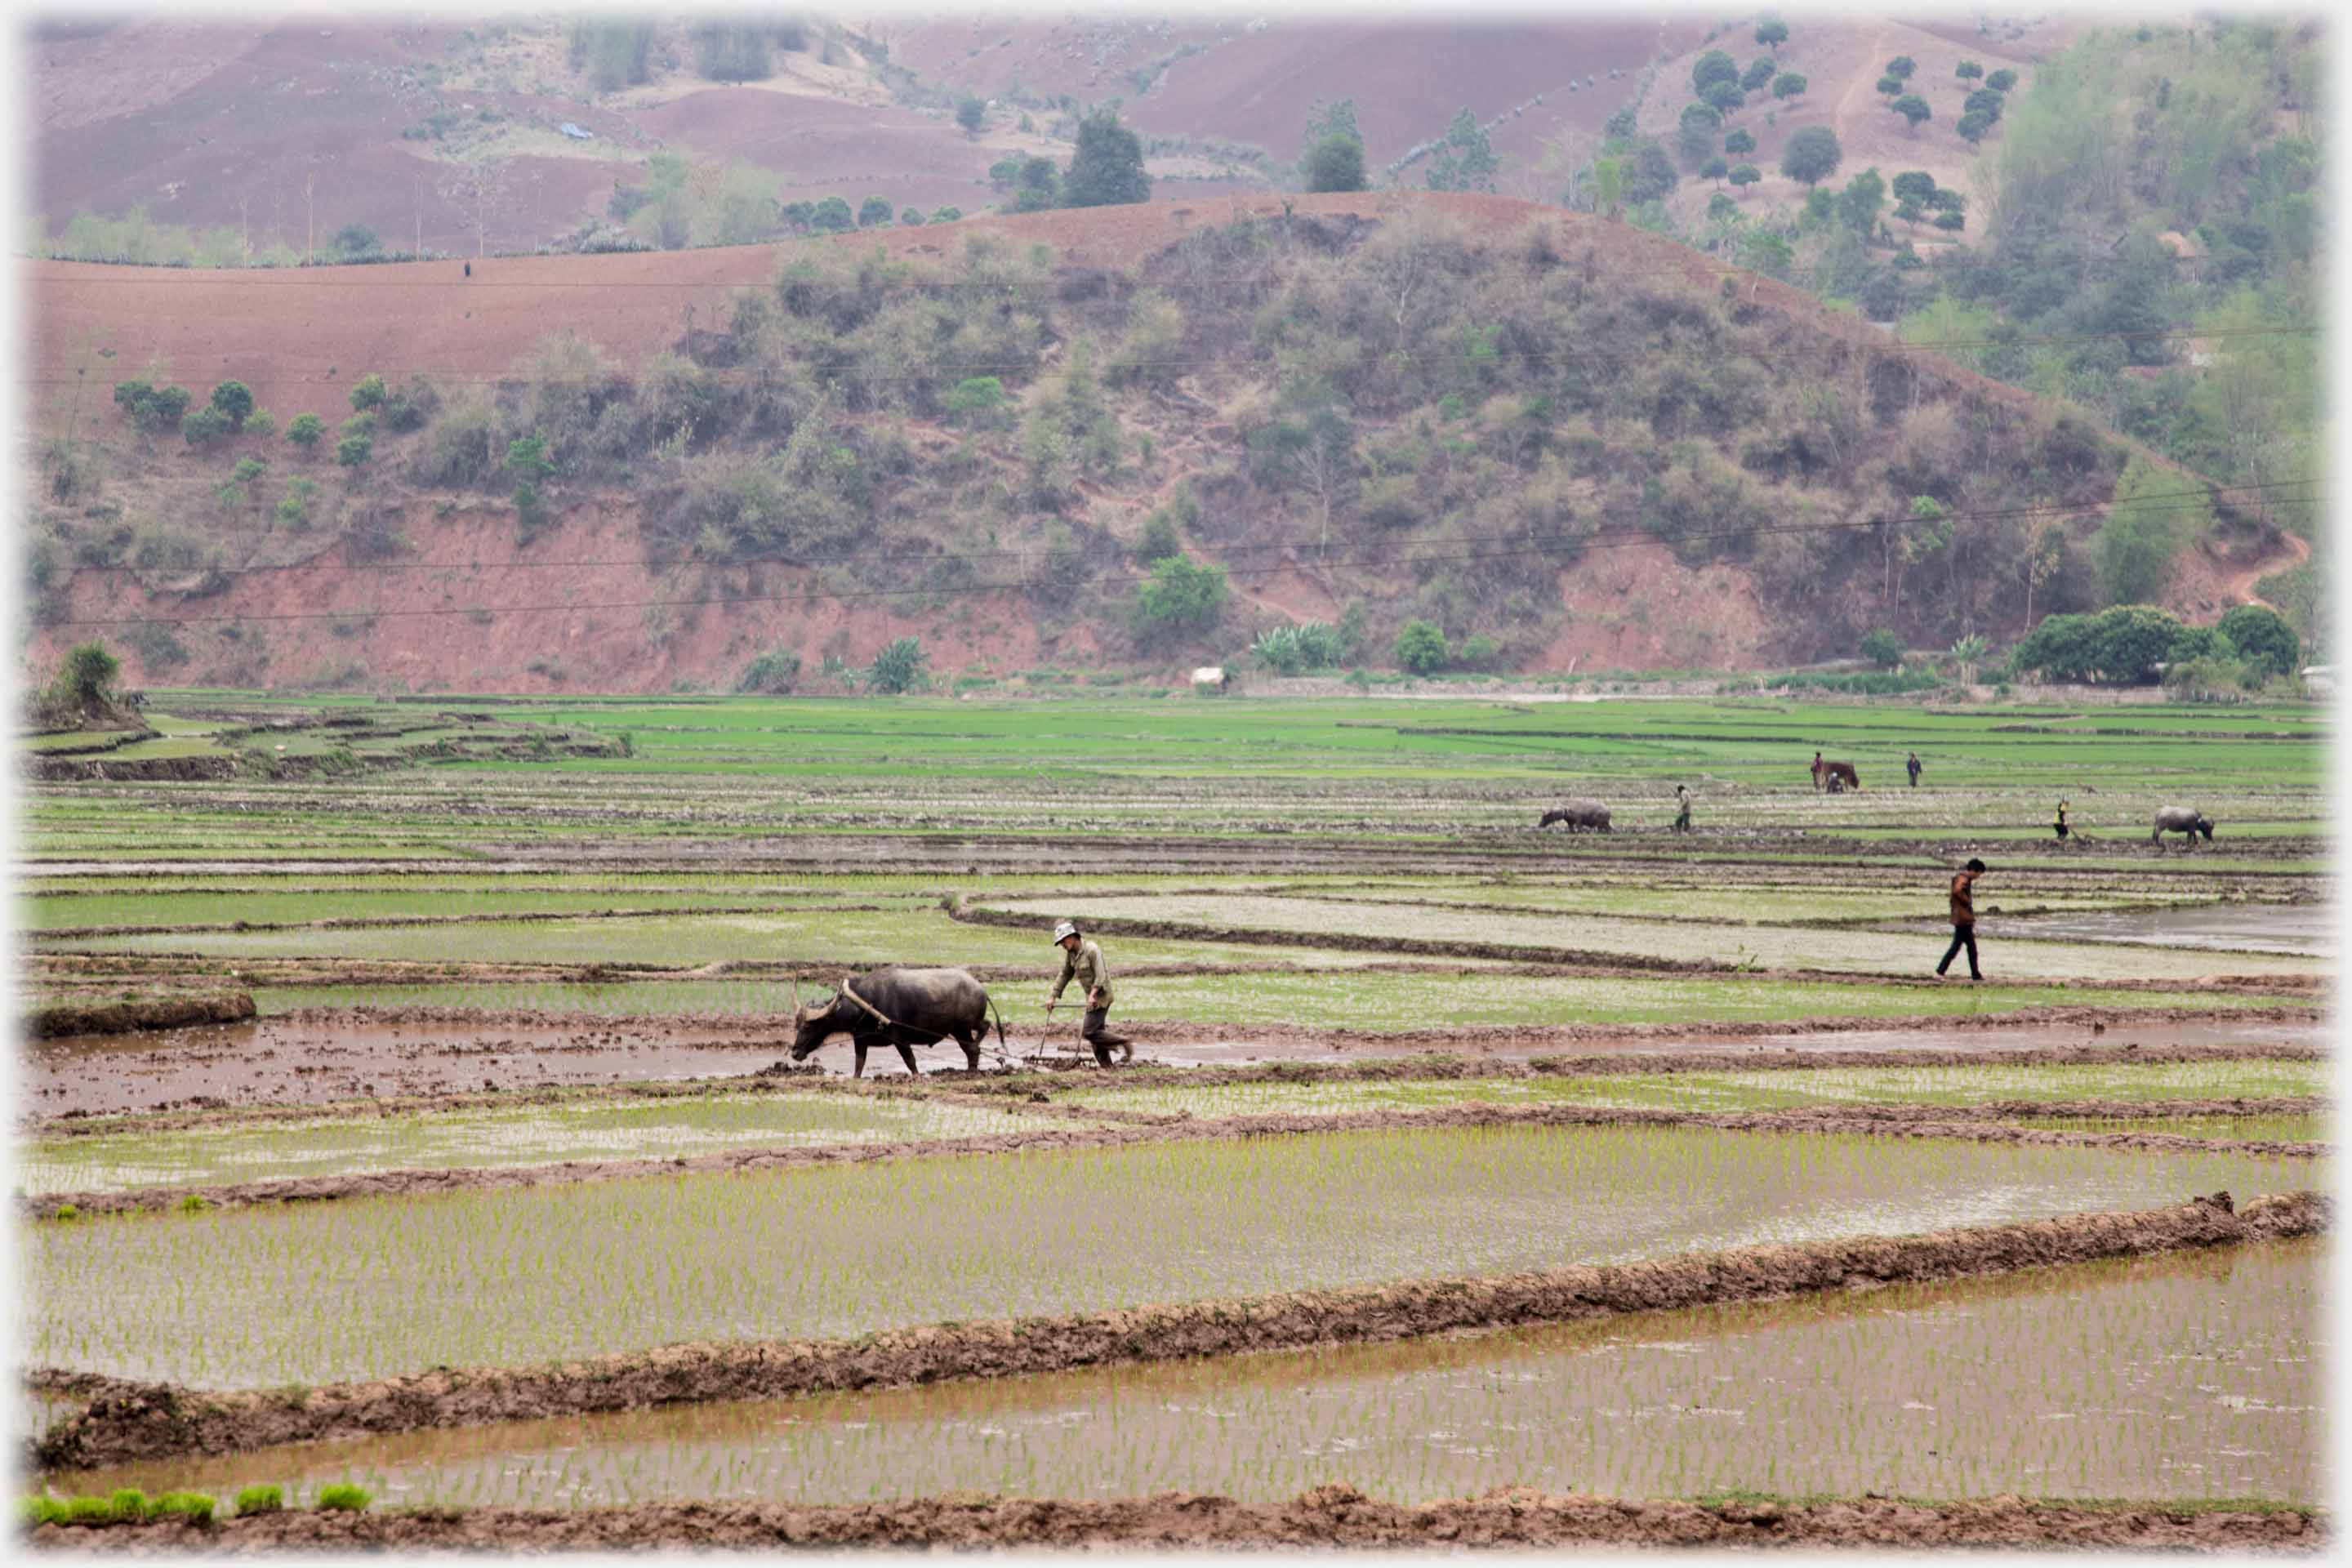 Wide area of fields with four buffalo visible.